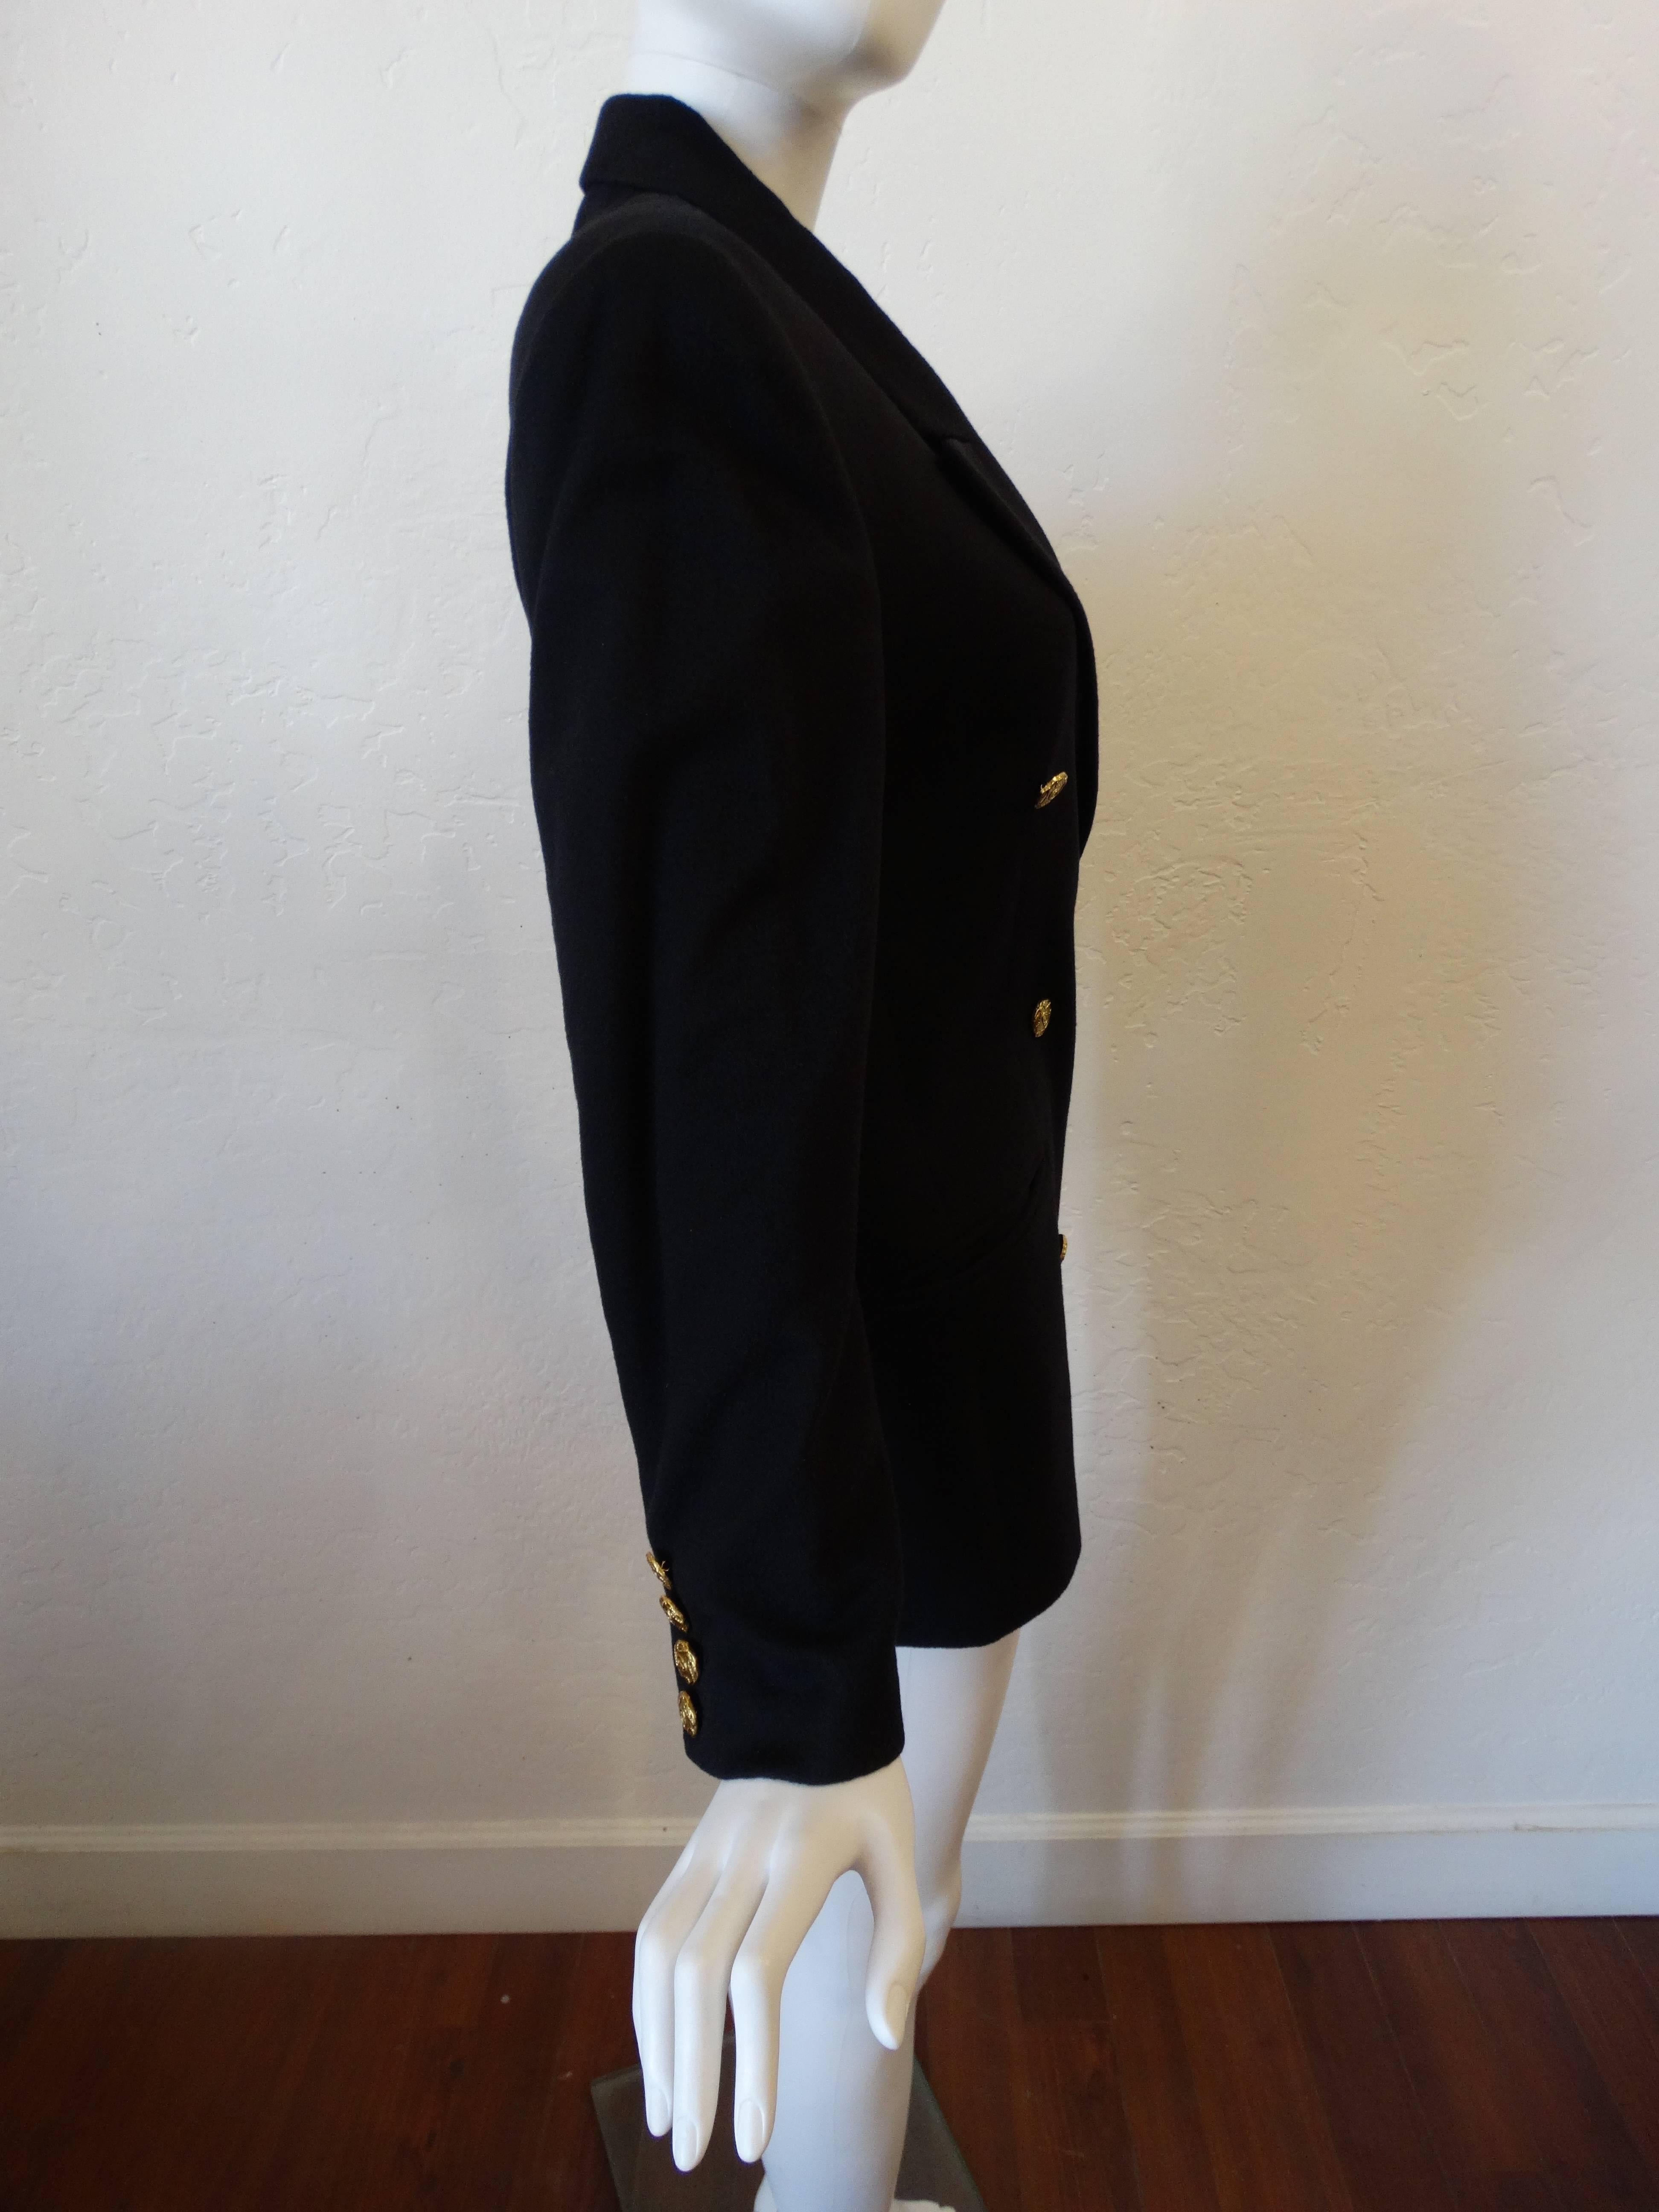 What a beauty! This is a rare find from Gucci created in the mid 1980's when men's wear was huge for women to wear. This coat is 100% cashmere, butter soft and is in a deep Navy. It has large gold GG buttons (see close up in images) such a classic